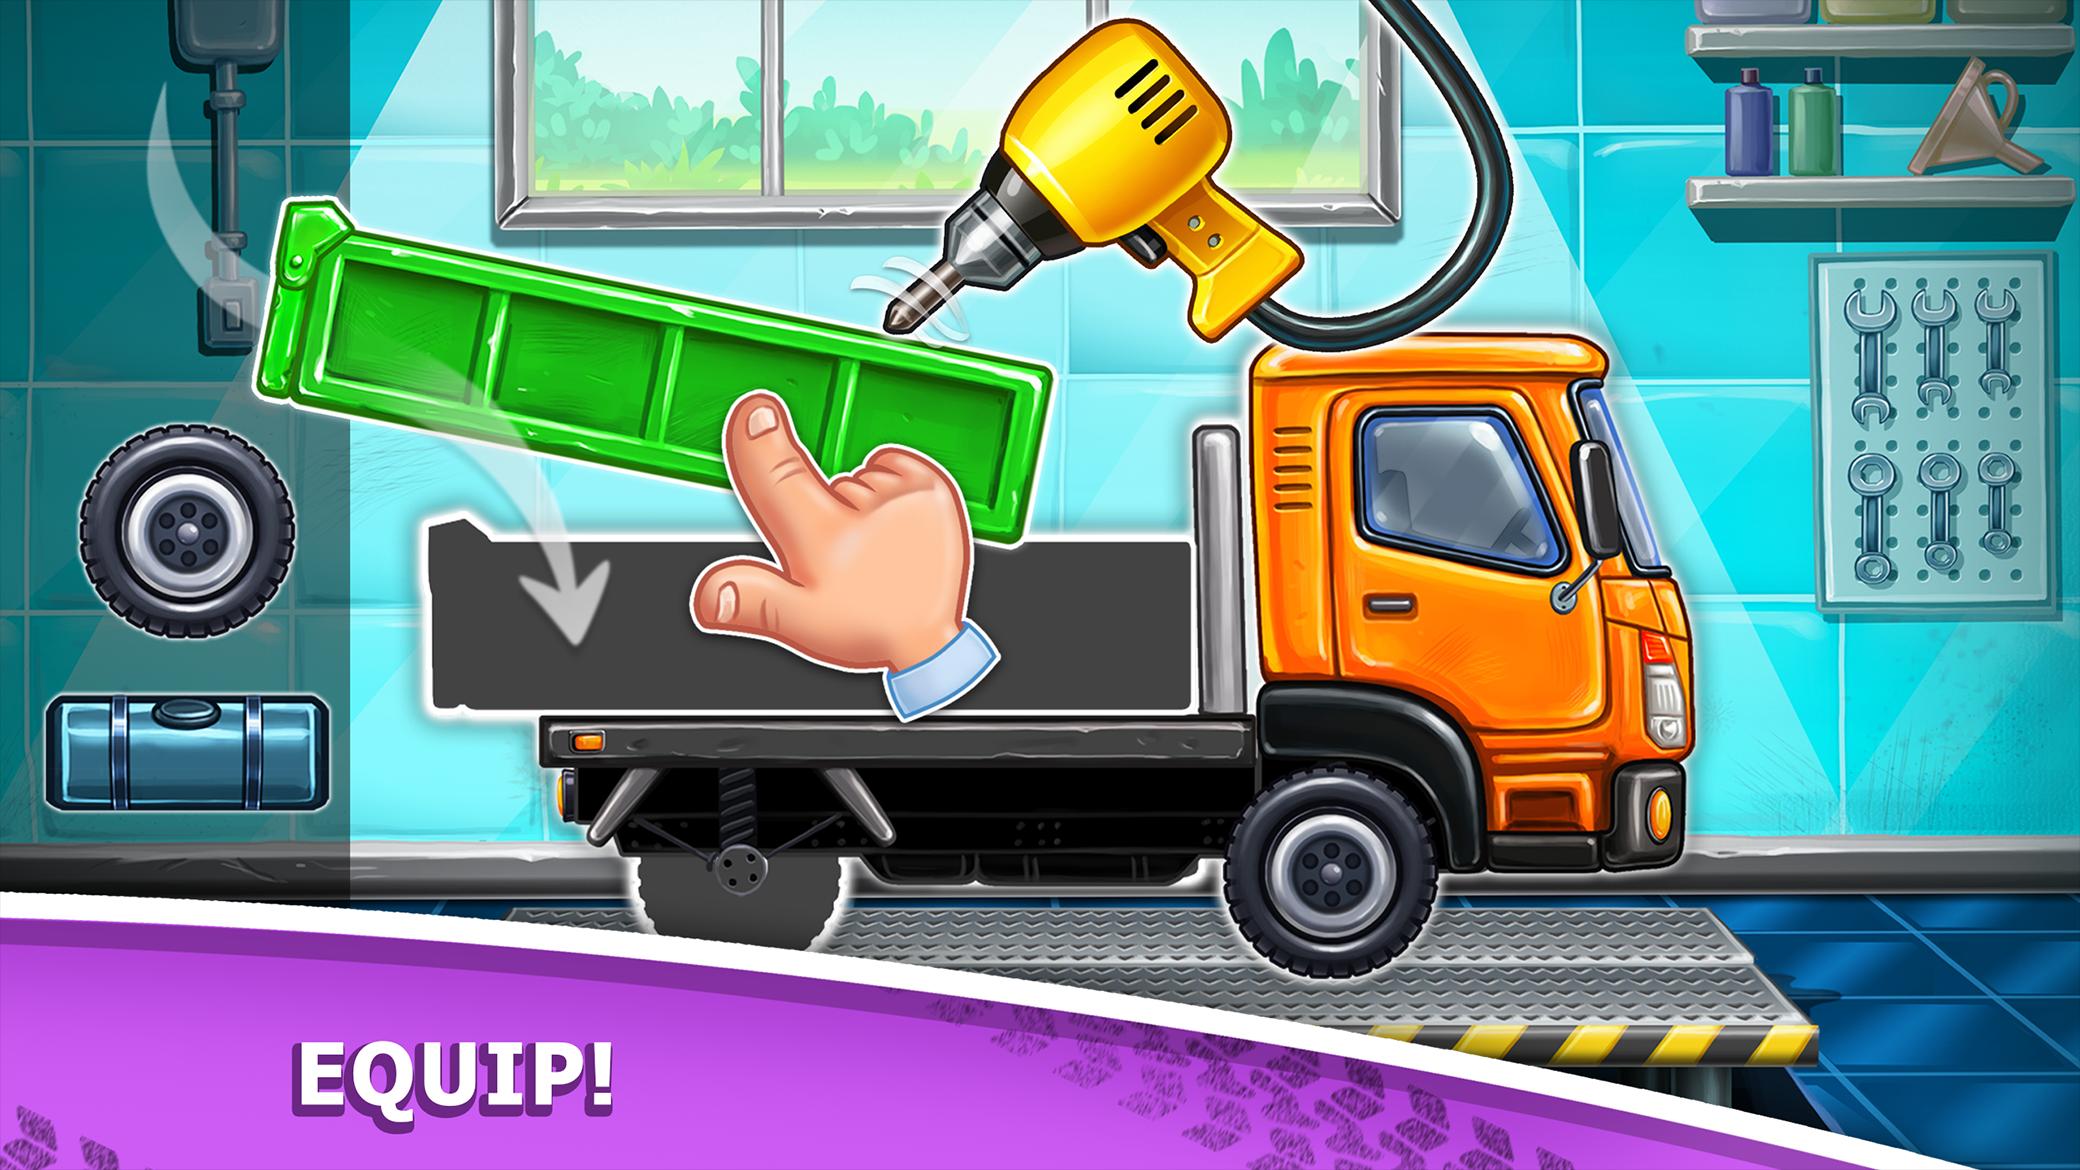 Truck games – build a house